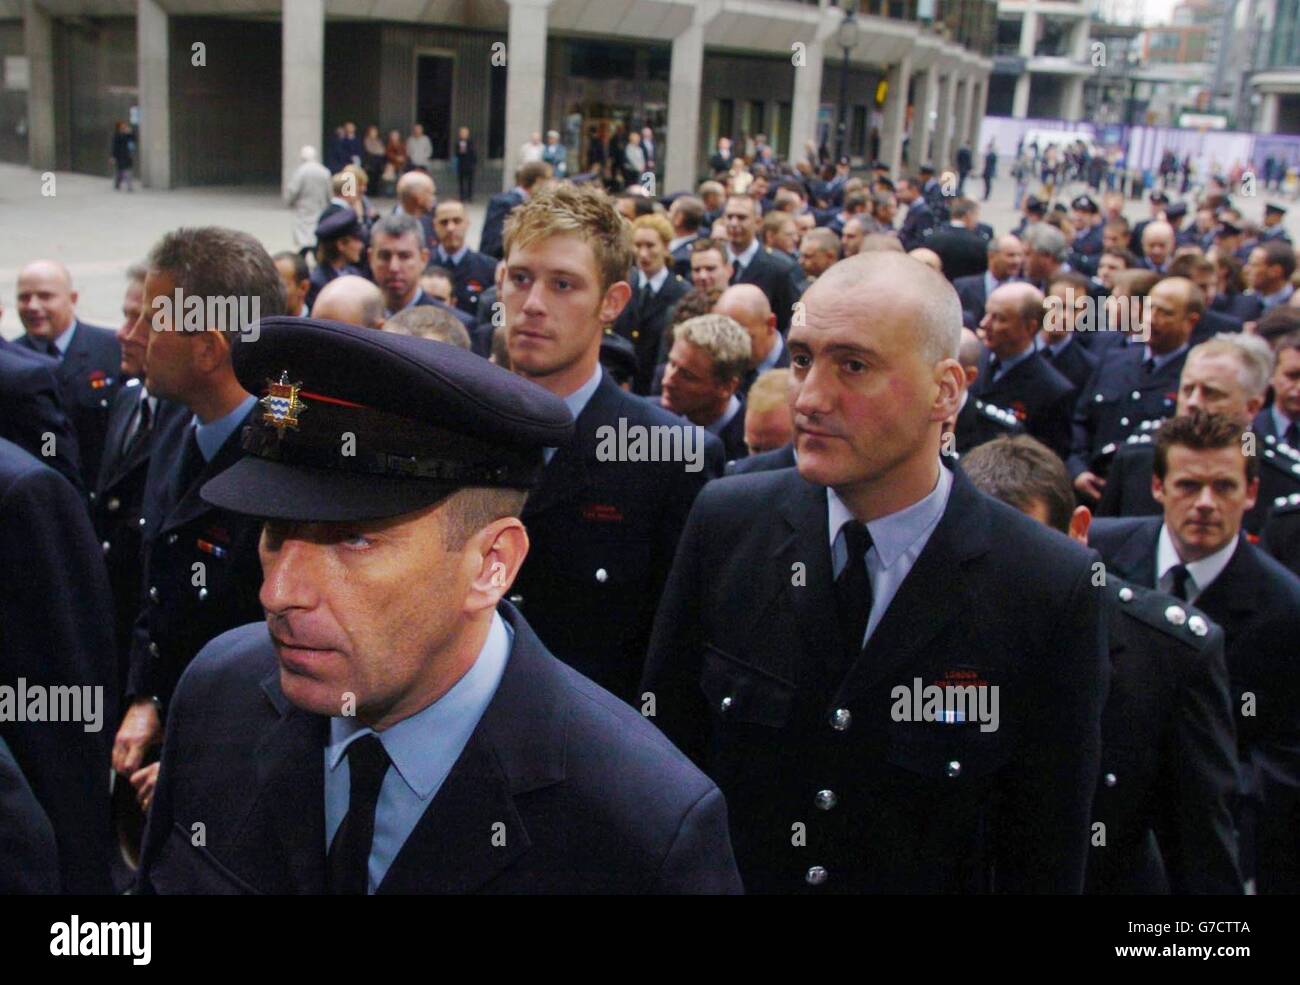 A memorial service for firefighters Bill Faust and Adam Meere inside Westminster Cathedral in central London. Around 3,000 mourners, gathered to commemorate the lives of the two men. Bill, 36, and Adam, 27, died while fighting a fire in Bethnal Green on July 20, from which two members of the public were rescued. Stock Photo